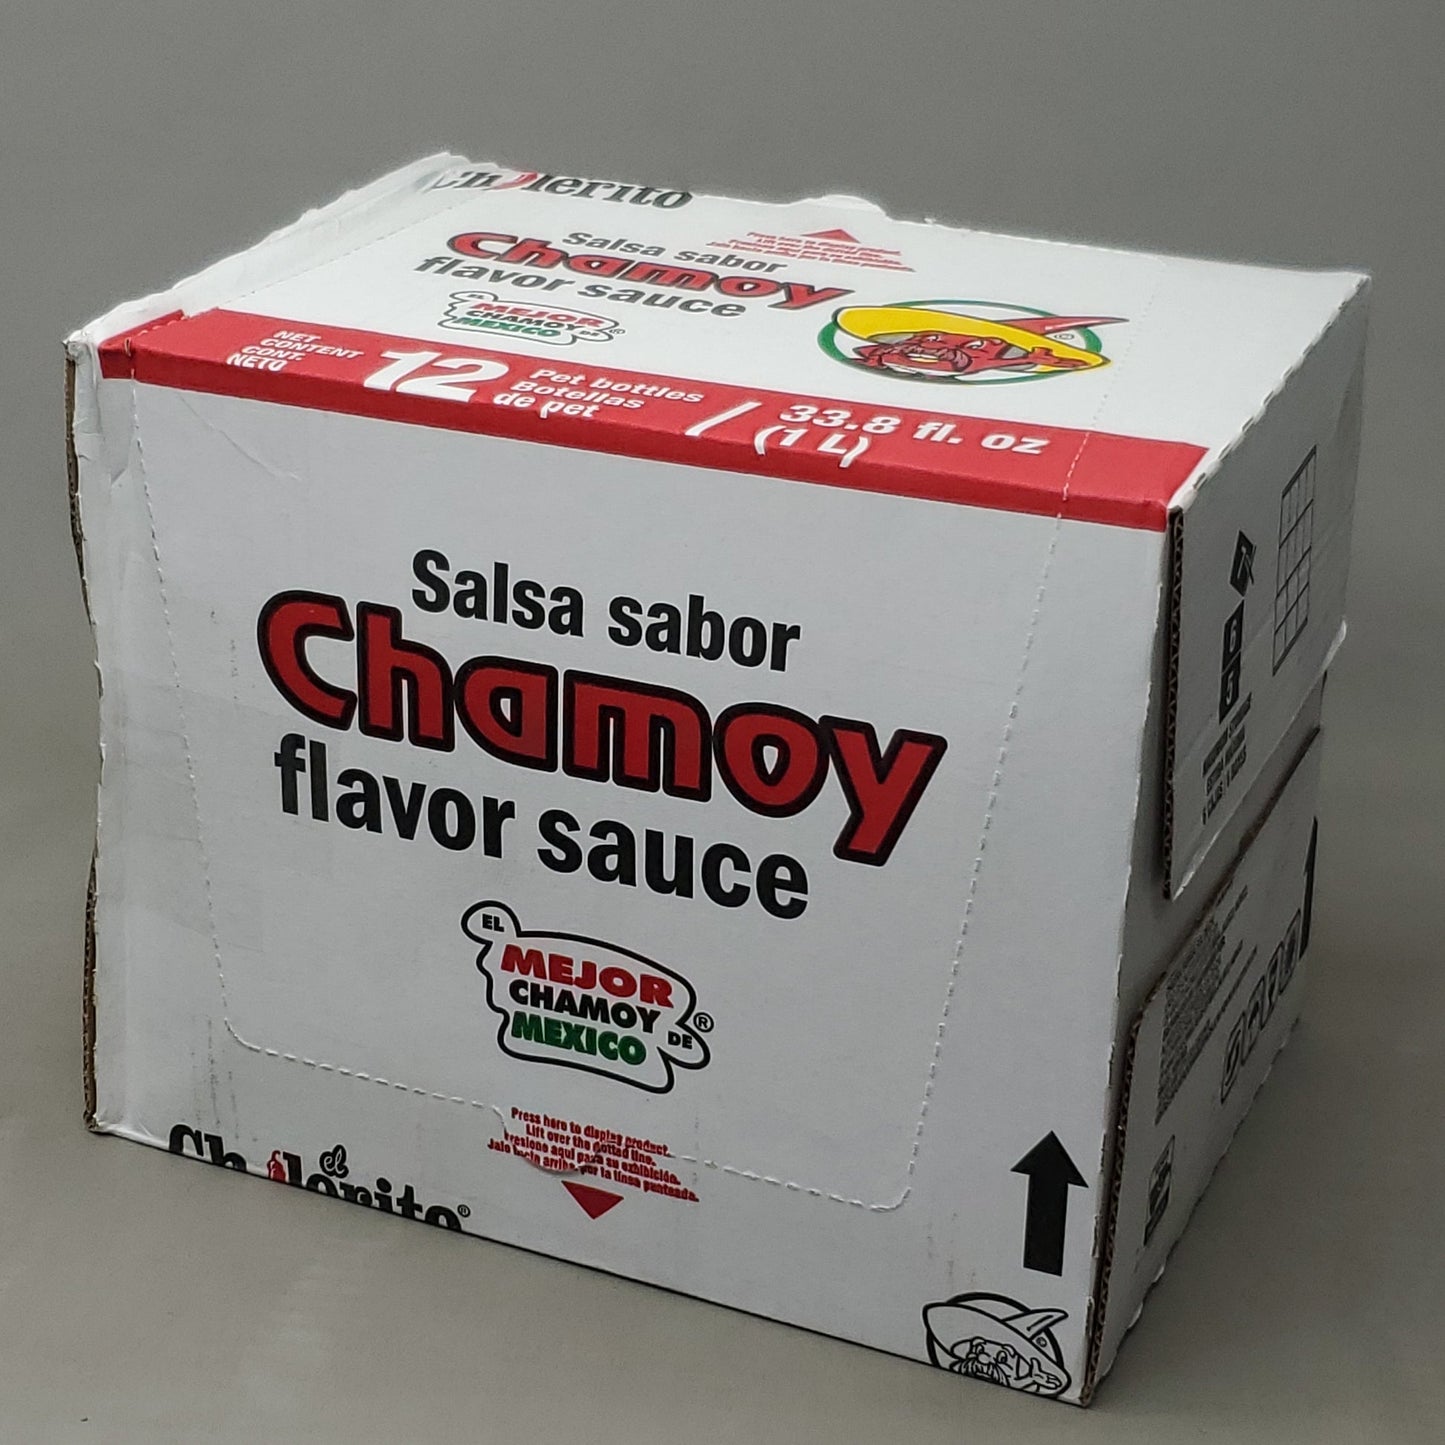 EL CHILERITO Chamoy Flavor Mild Hot Sauce 33.8 fl oz - 12x ct. Best By: 9/23 Shelf Stable (As-Is)